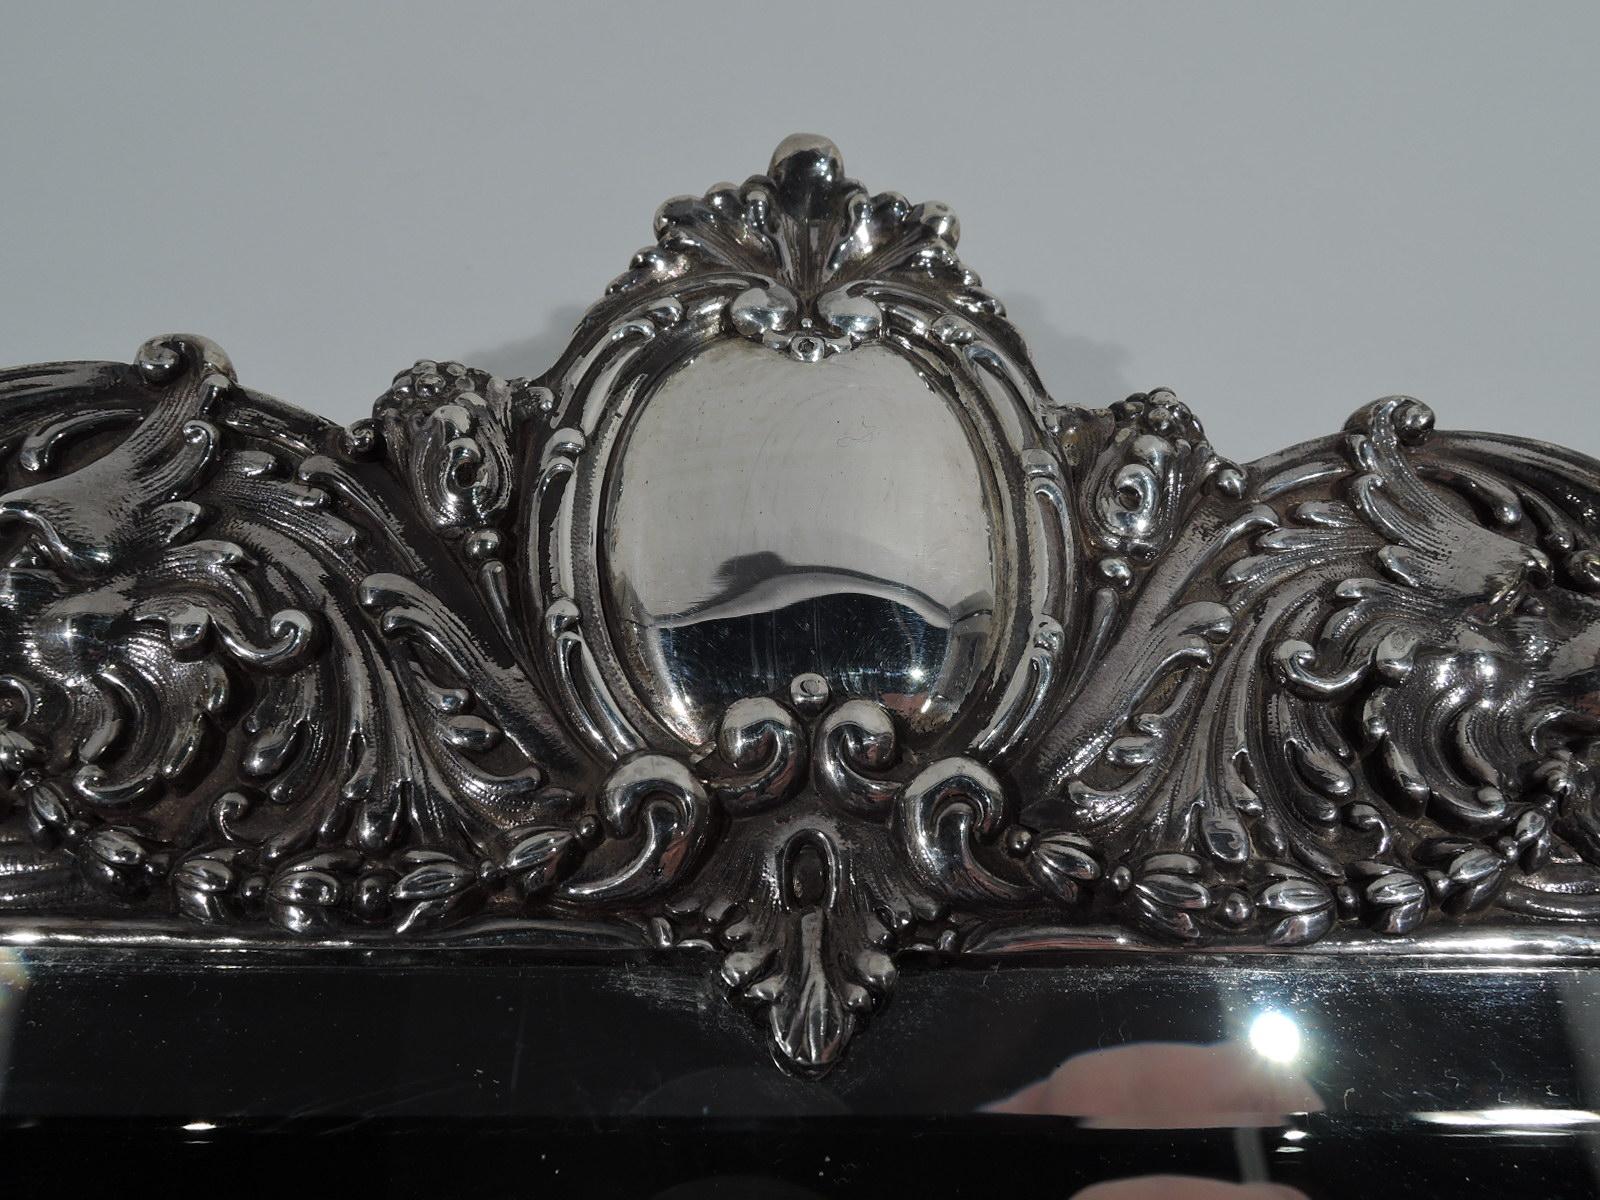 Rococo Revival sterling silver vanity mirror. Made by Tiffany & Co. in New York. Rectangular beveled glass in shaped surround with bracket supports and scrolled crown. Dense and dynamic ornament with scrolls and flowers. Crown has oval cartouche